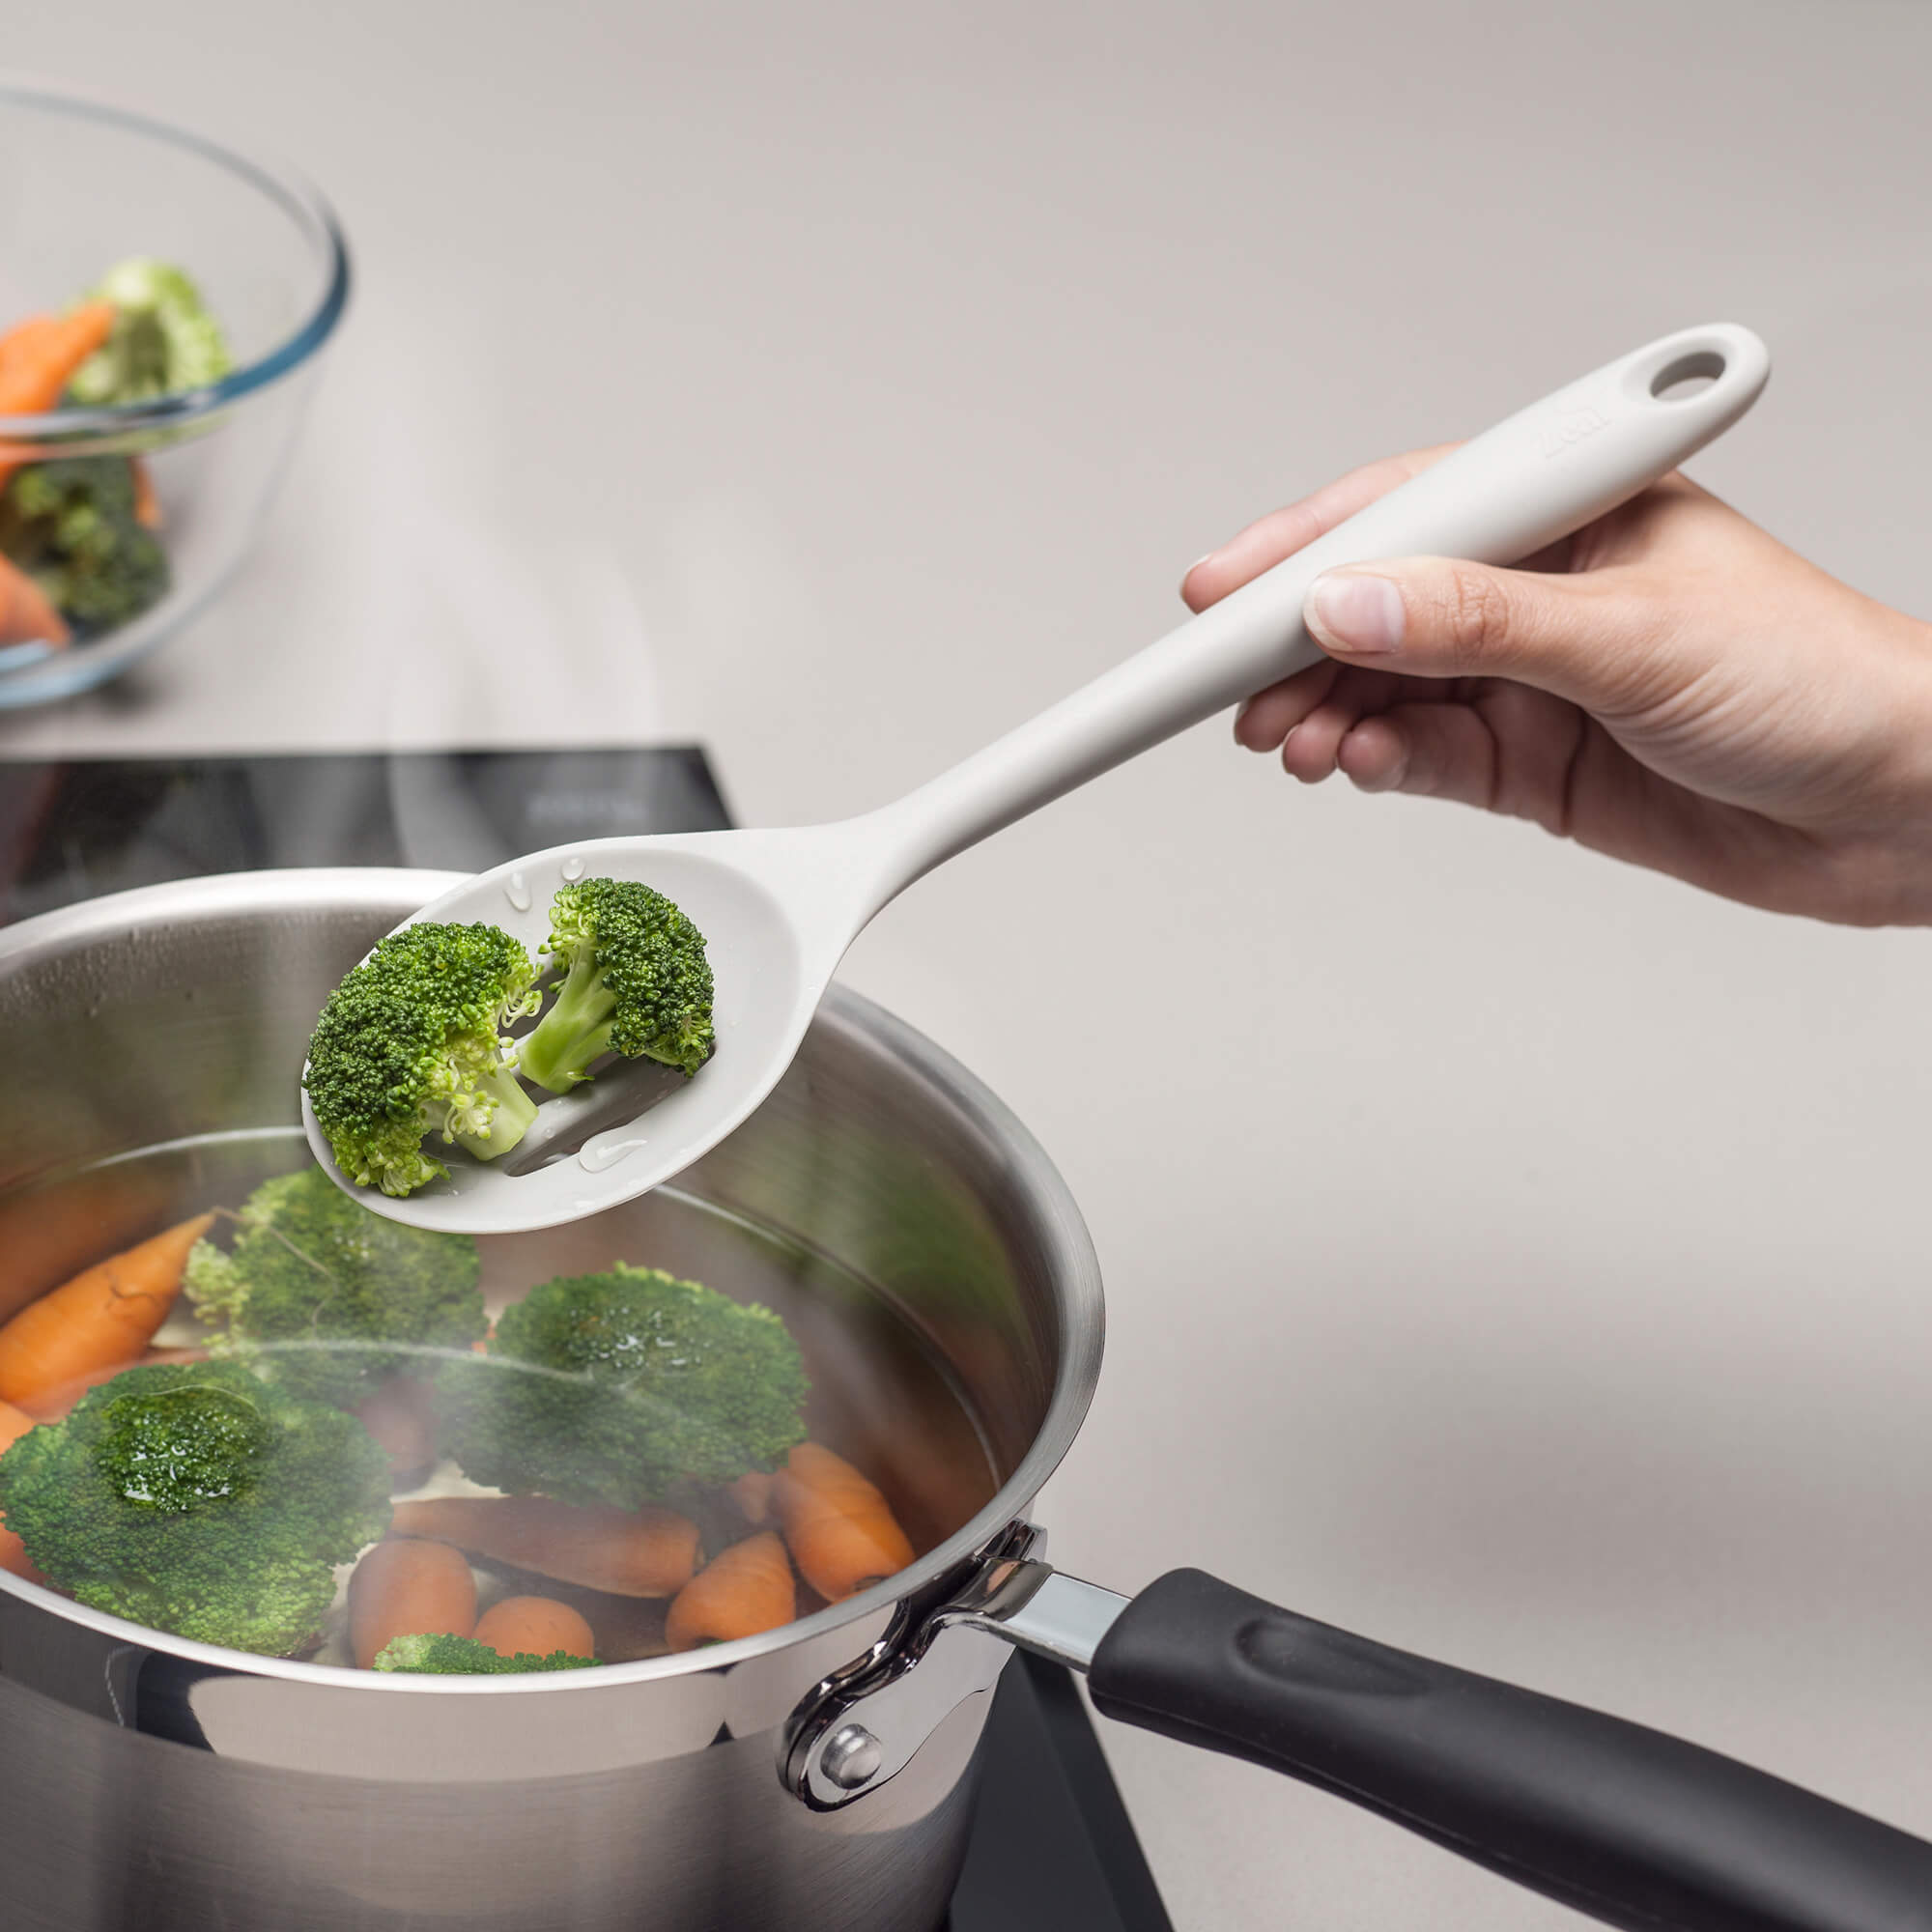 Using a Zeal Silicone Slotted Spoon to drain broccoli